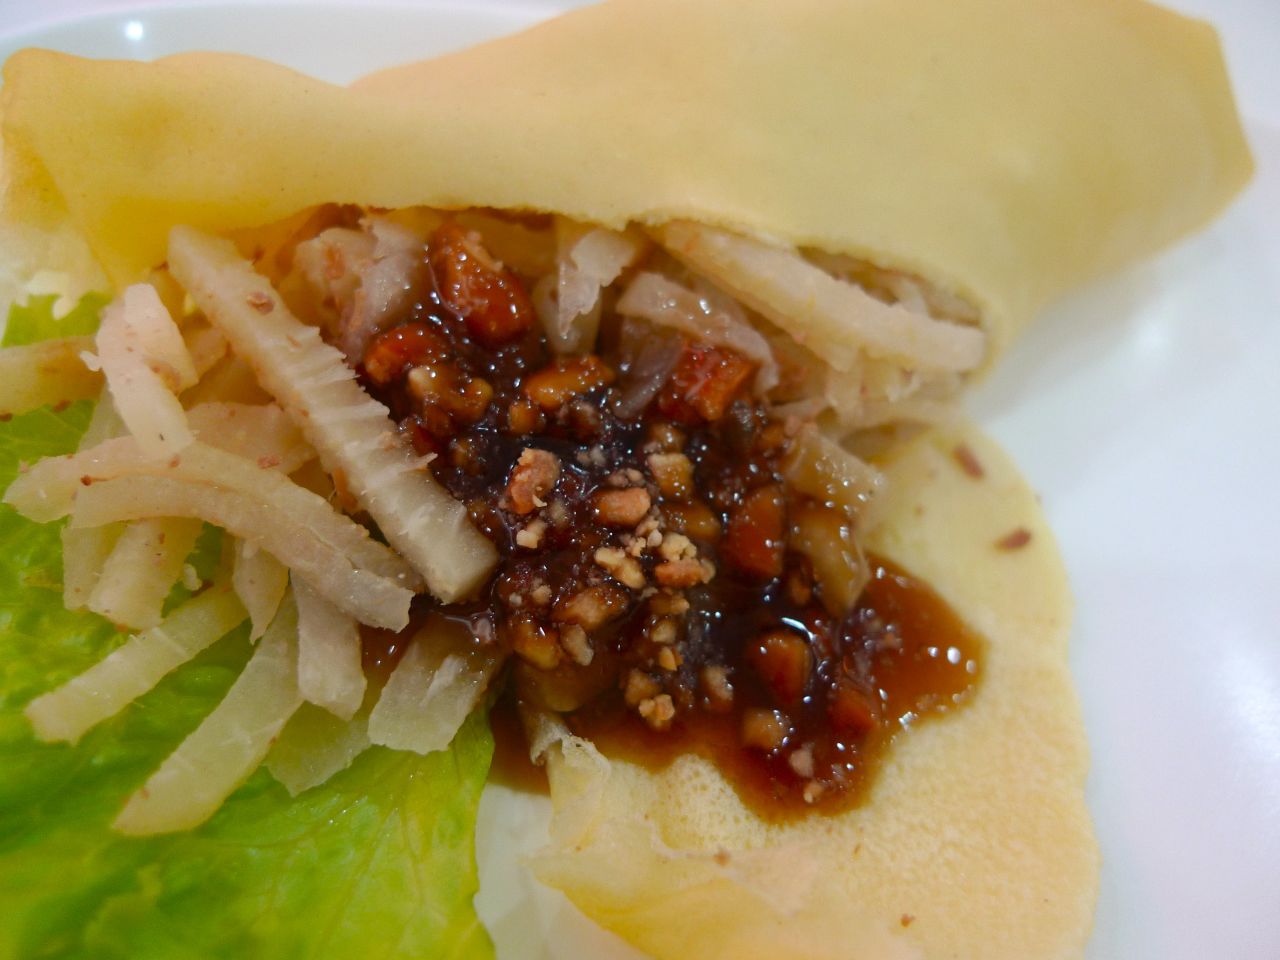 A delicate egg wrapper contains a savory filling of ubod (the pith of the coconut tree), shrimps, pork, onions and a garlicky sweet sauce.